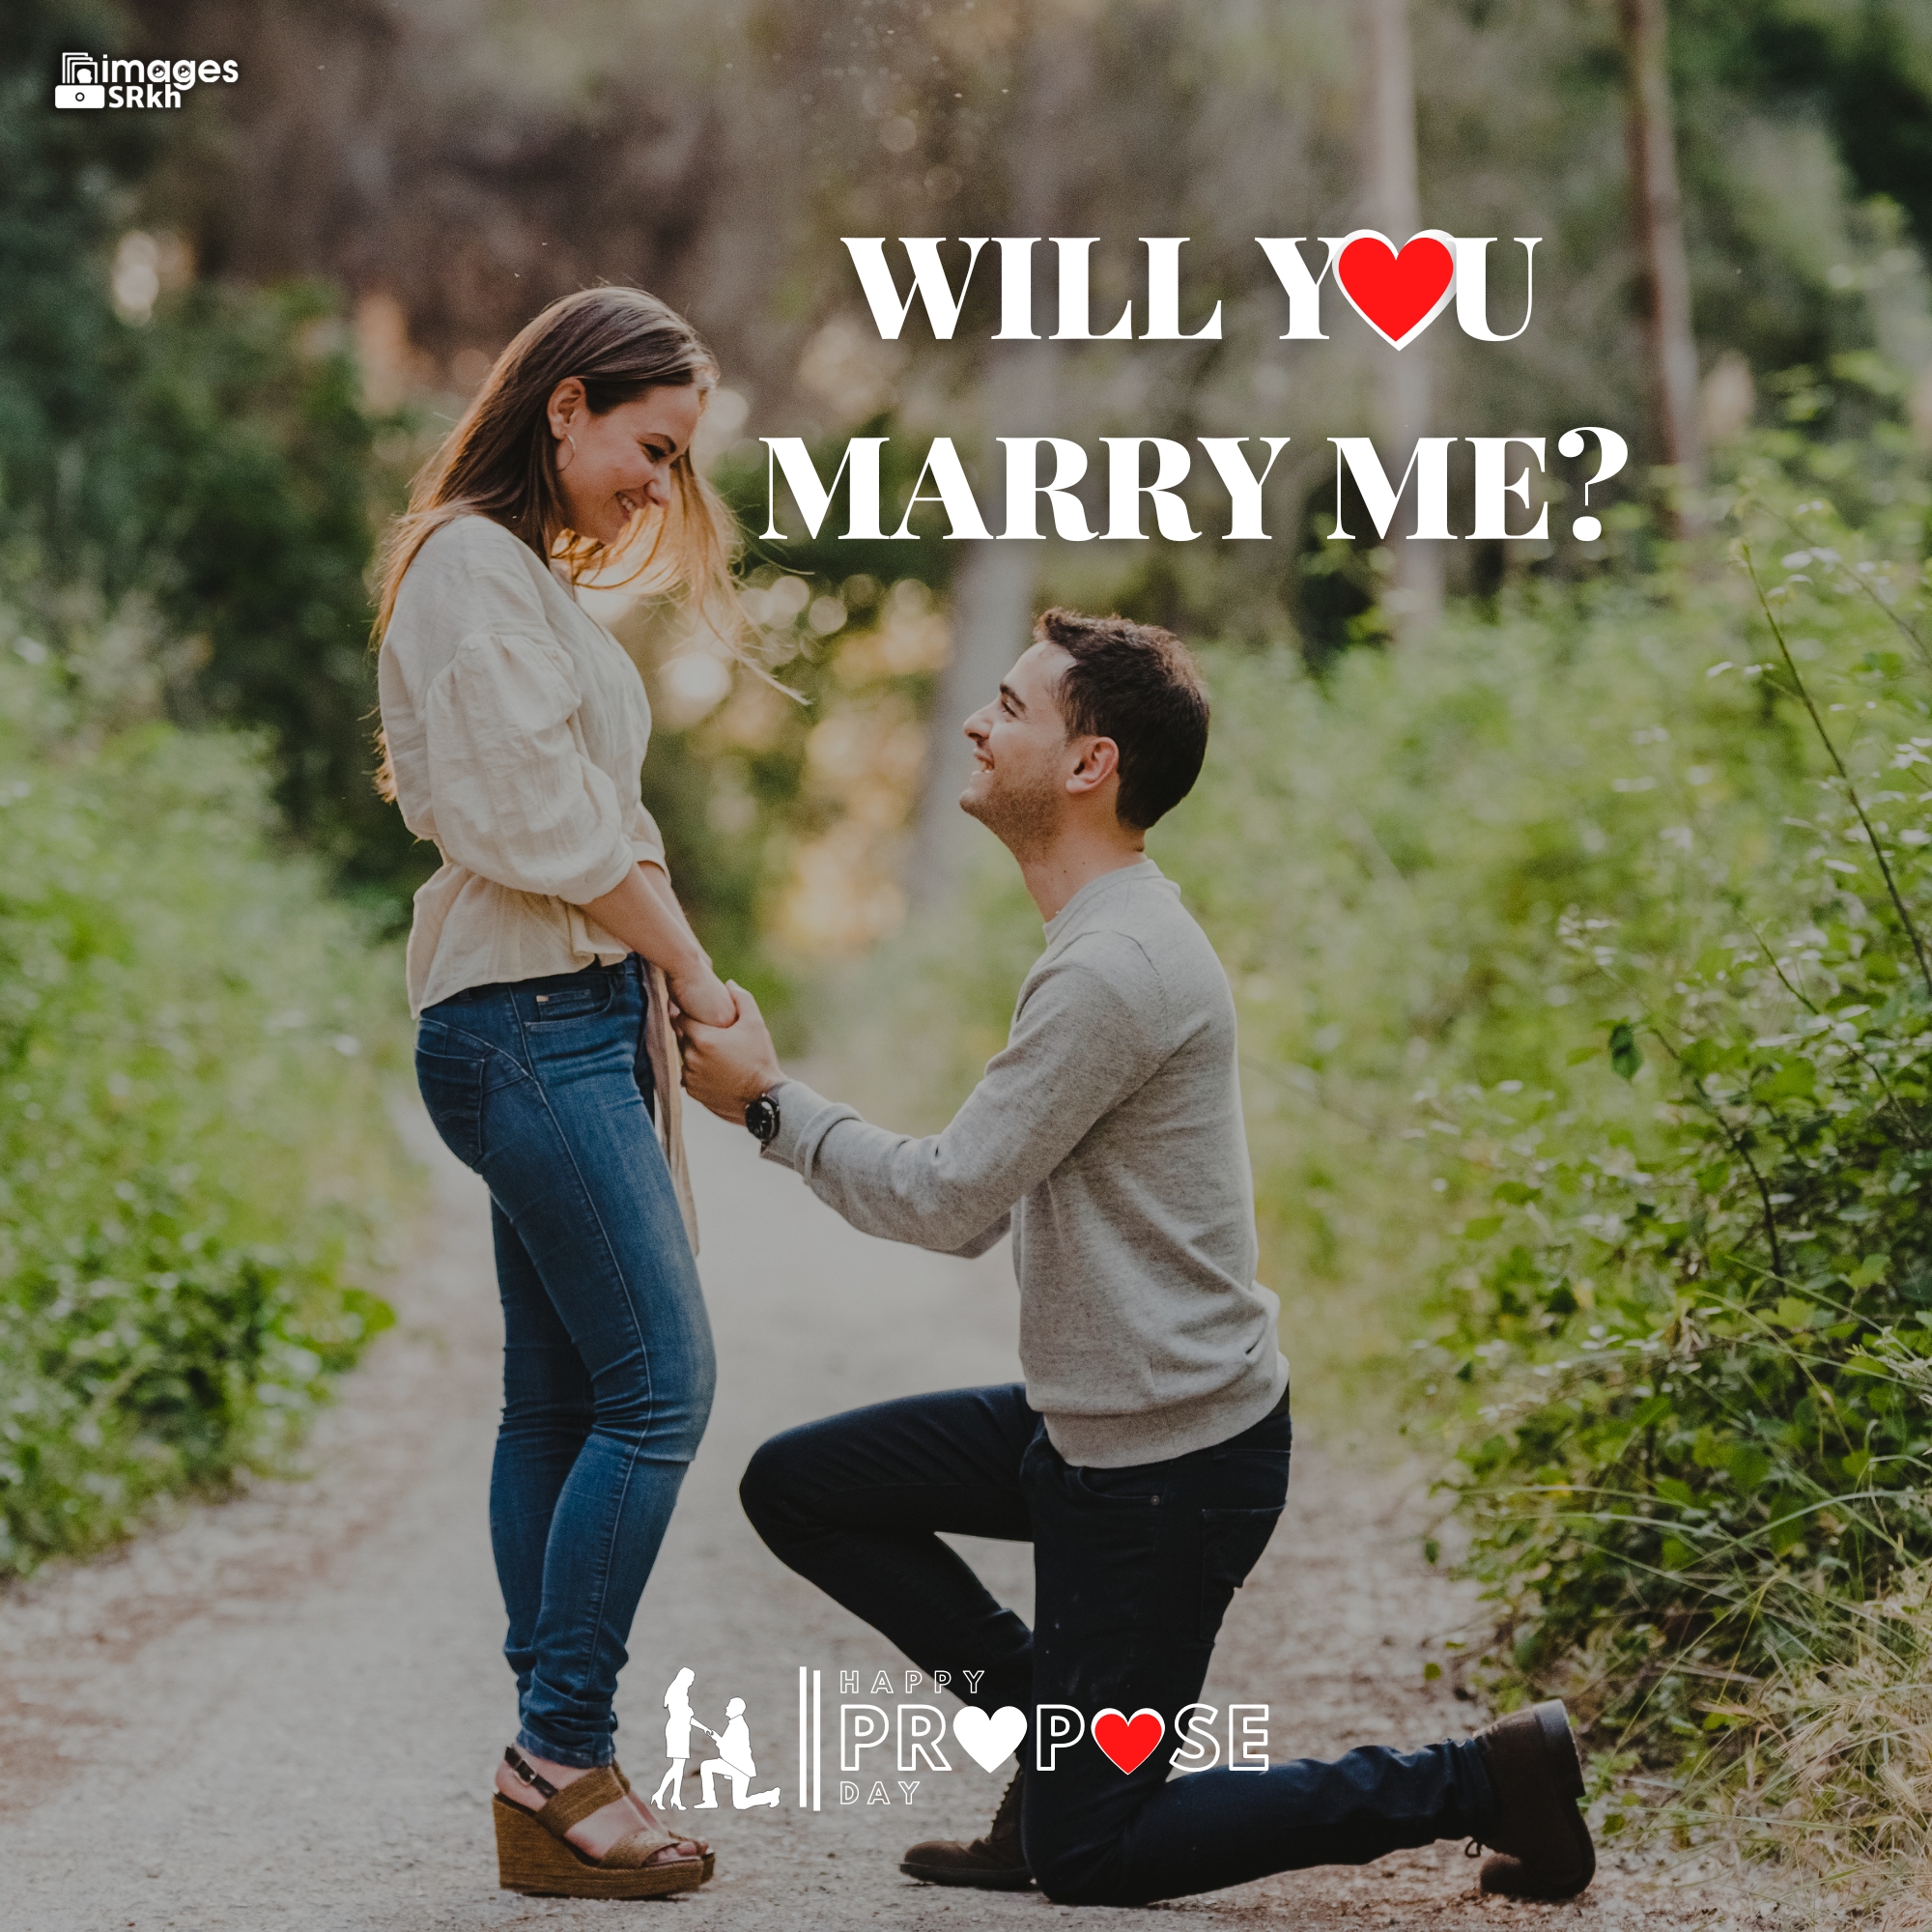 Propose Day Images | 267 | Will You MARRY ME